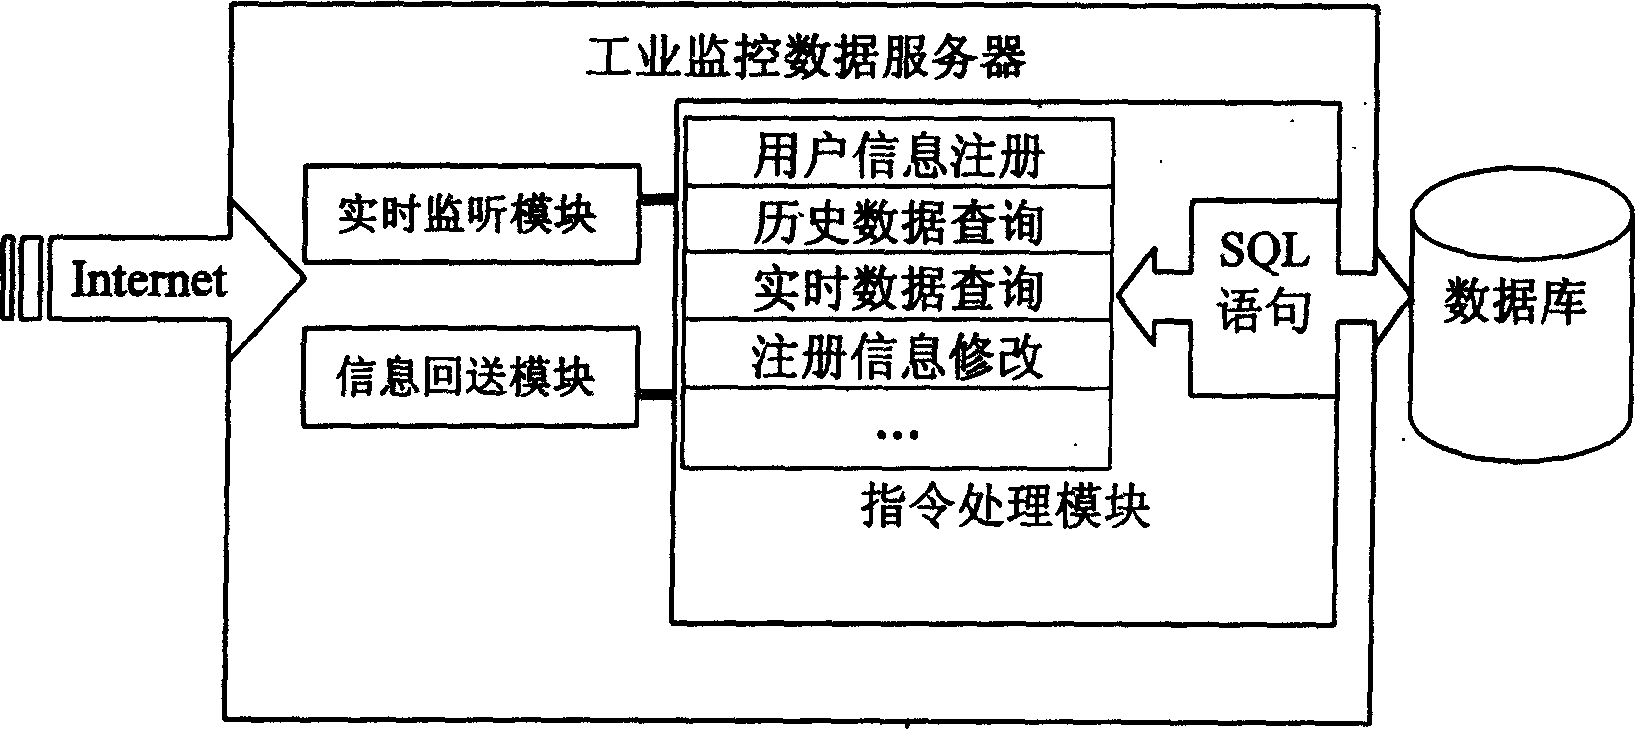 Method and system for realizing wireless industrial monitoring by means of cell phones